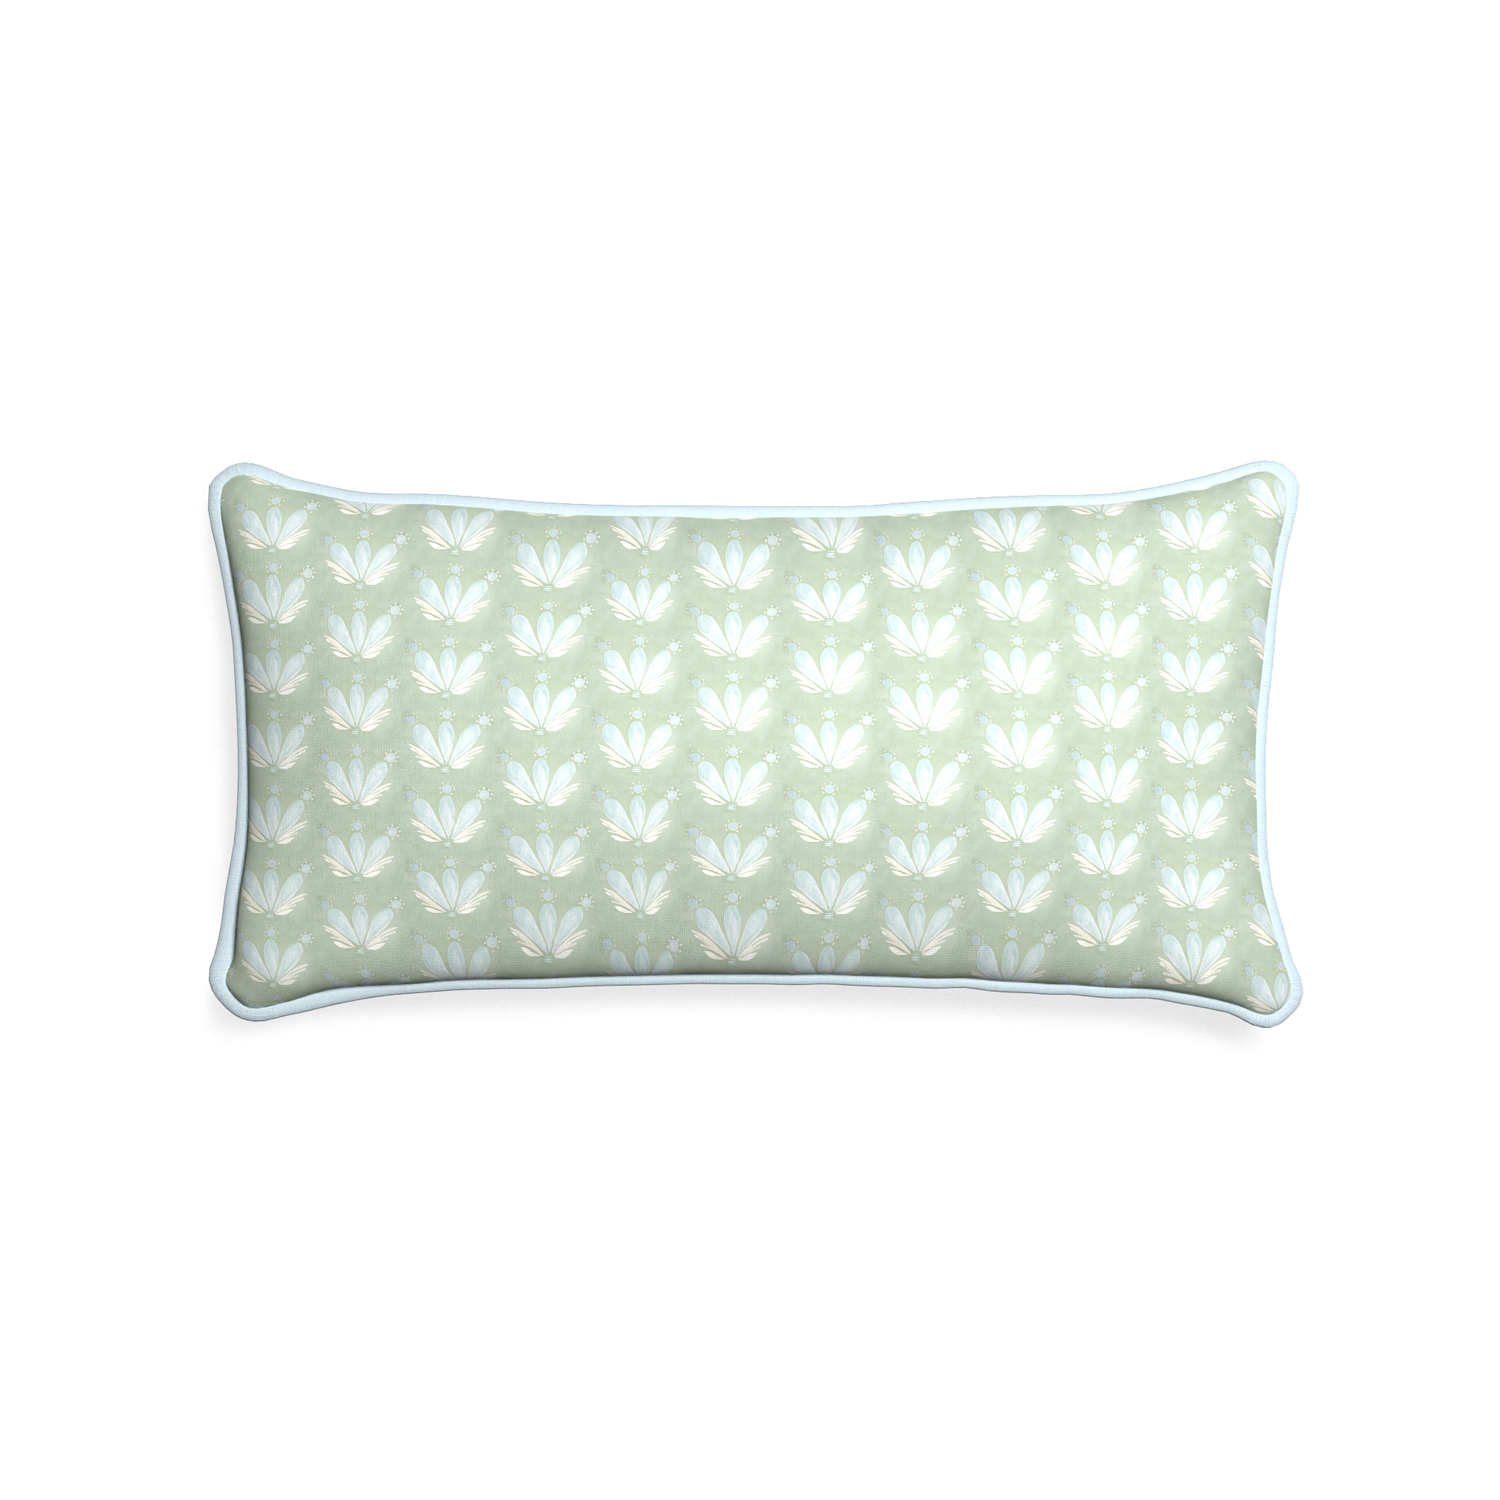 Midi-lumbar serena sea salt custom blue & green floral drop repeatpillow with powder piping on white background